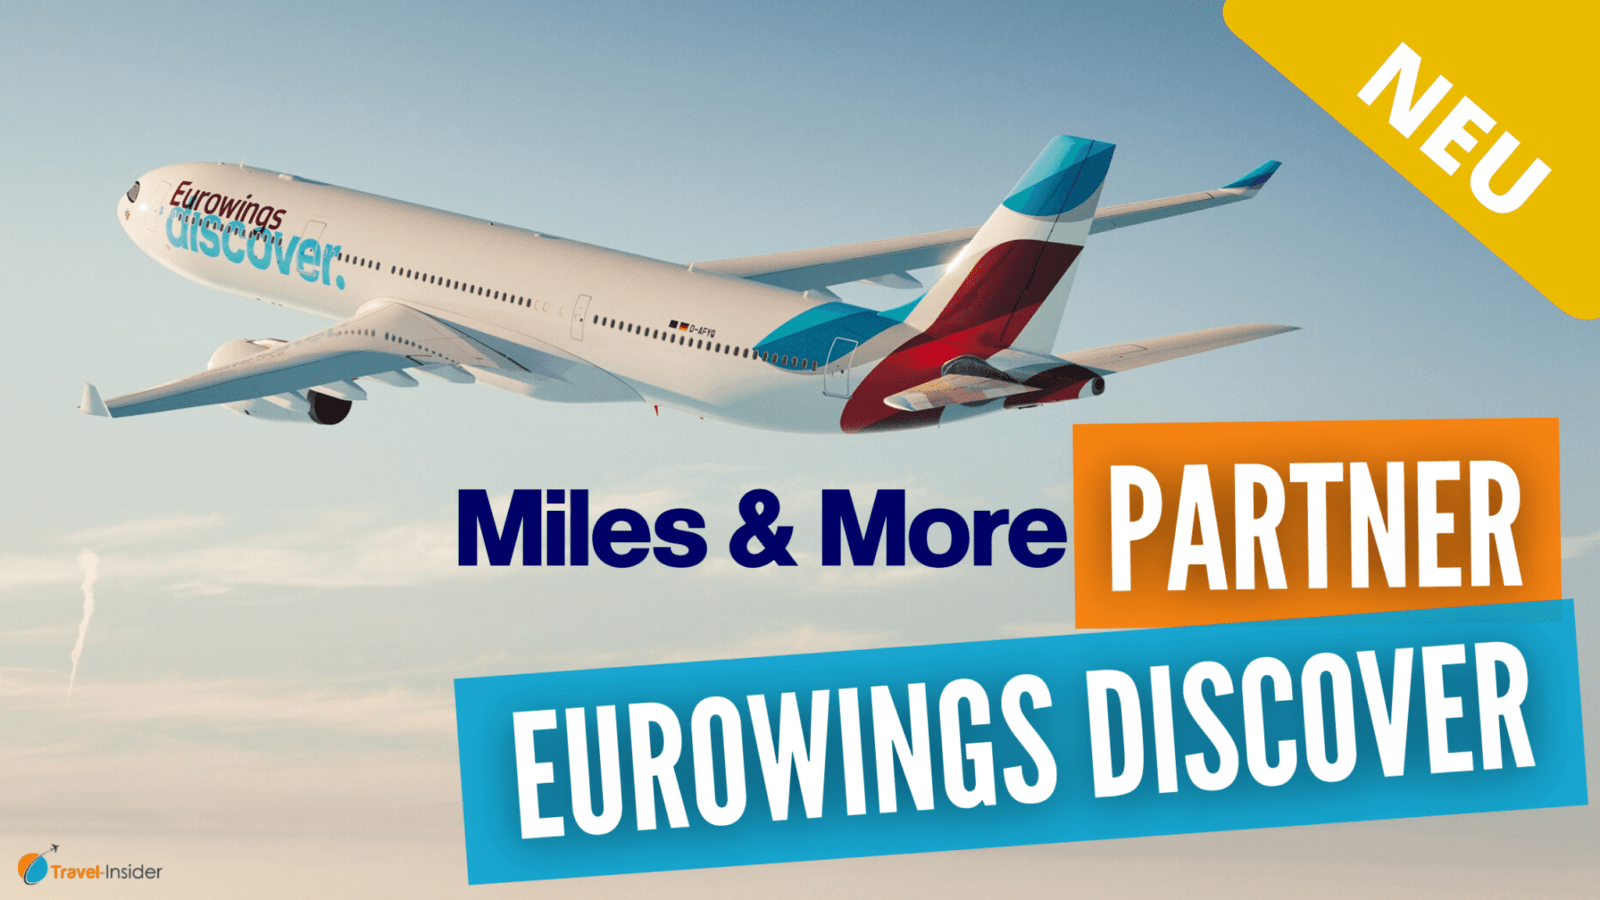 Neue Airline Eurowings Discover wird Miles & More Partner